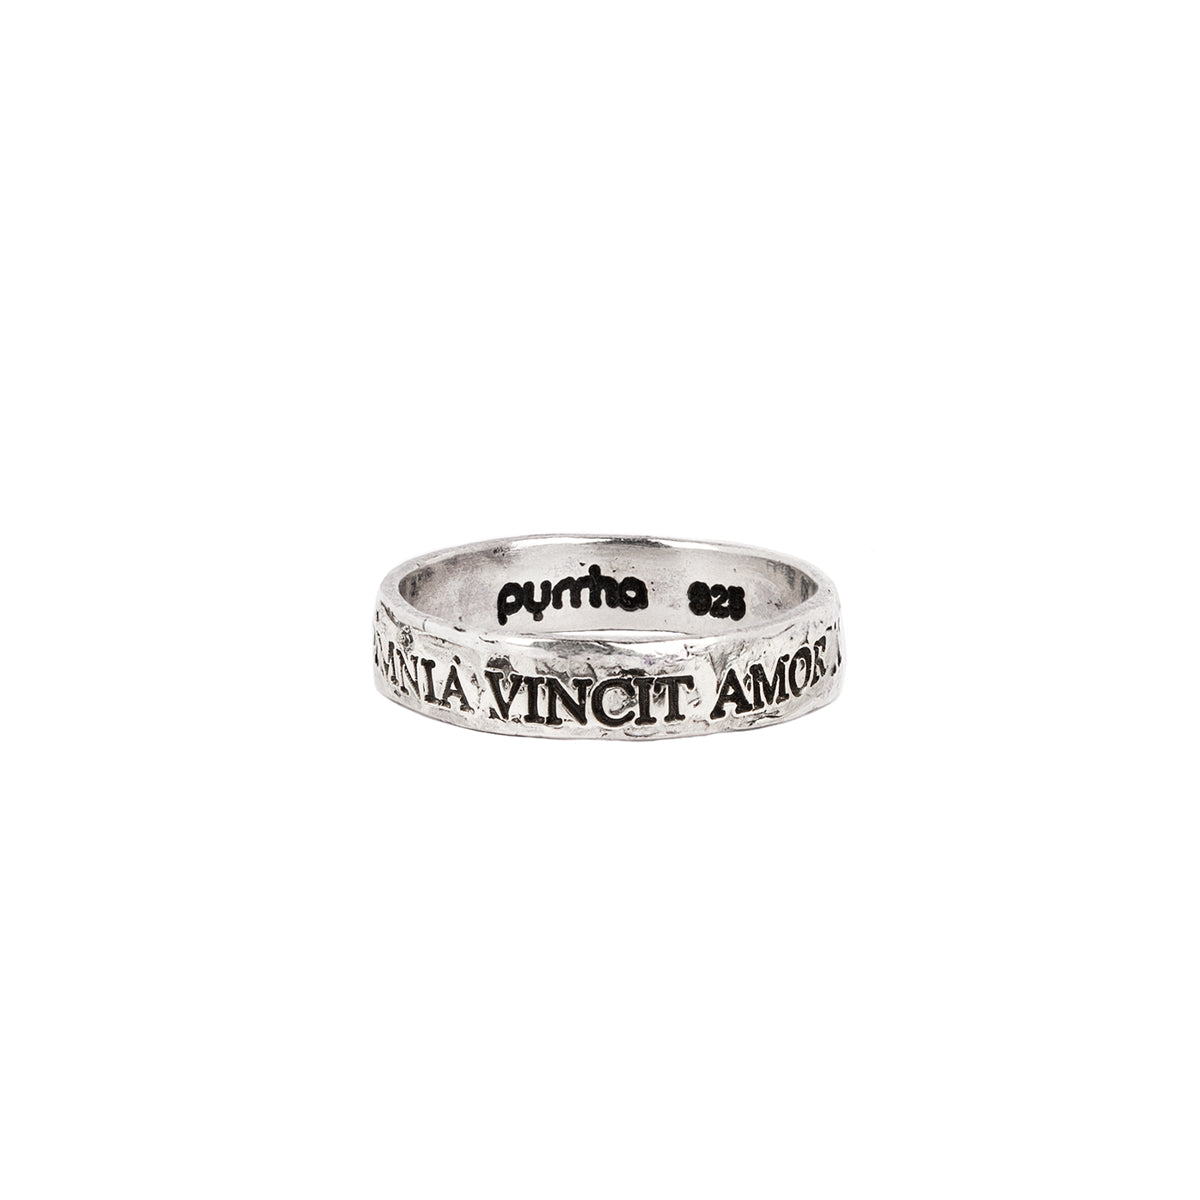 A silver band ring with the phrase Omnia Vincit Amor engraved into it